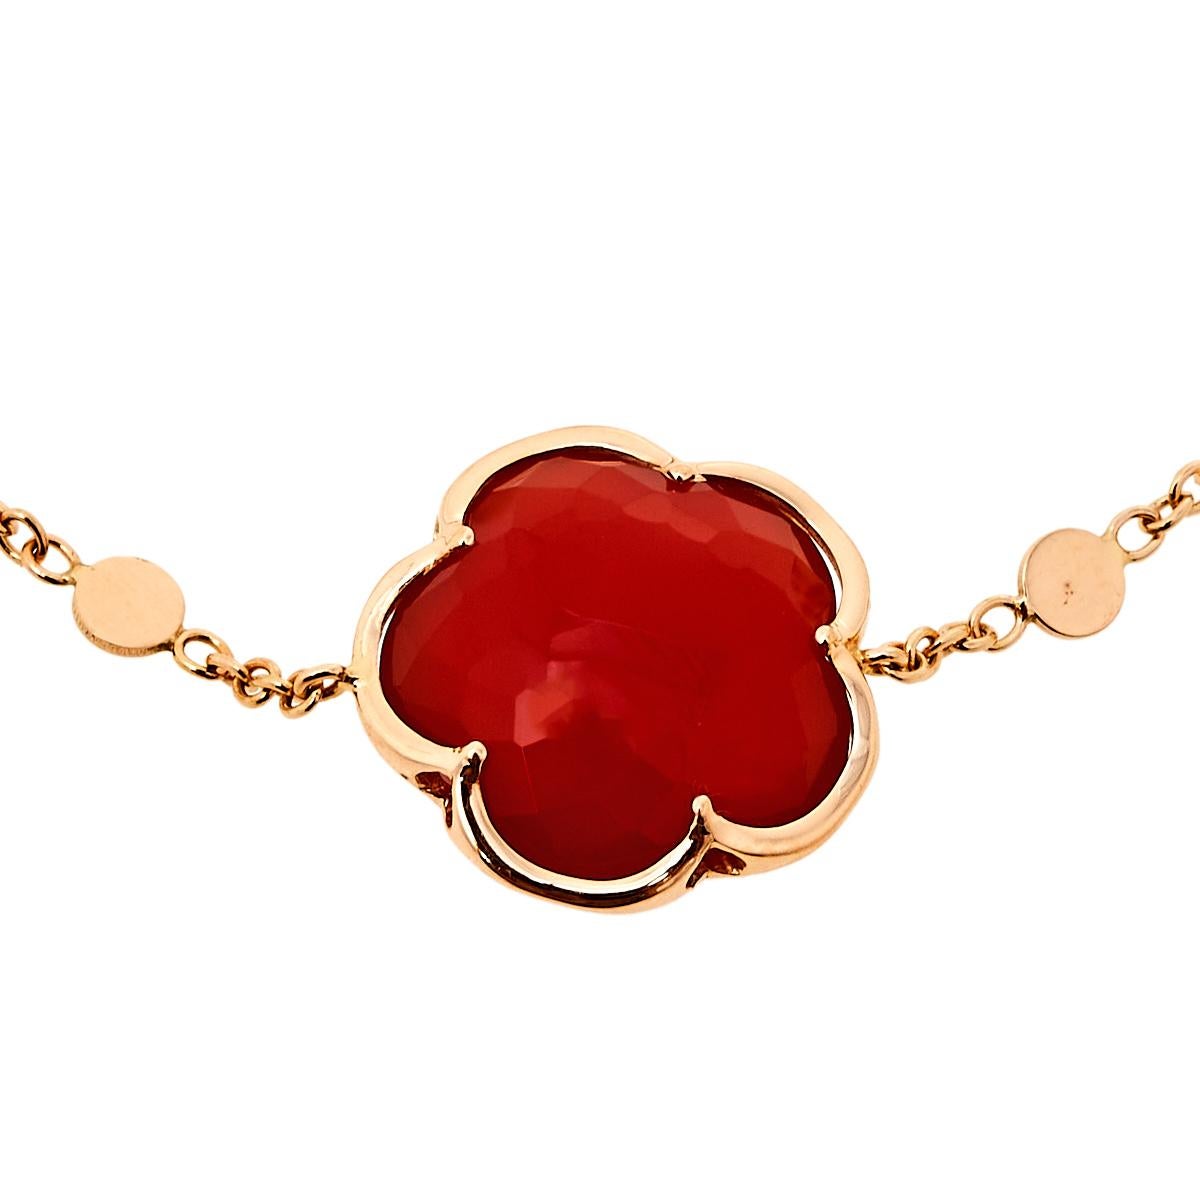 Pasquale Bruni's iconic Bon Ton collection of jewelry brings to light a unique five-petal flower in an elegant way. This Bon Ton bracelet in 18k rose gold has a delicate chain that sits lightly around any wrist. The central motif is the signature